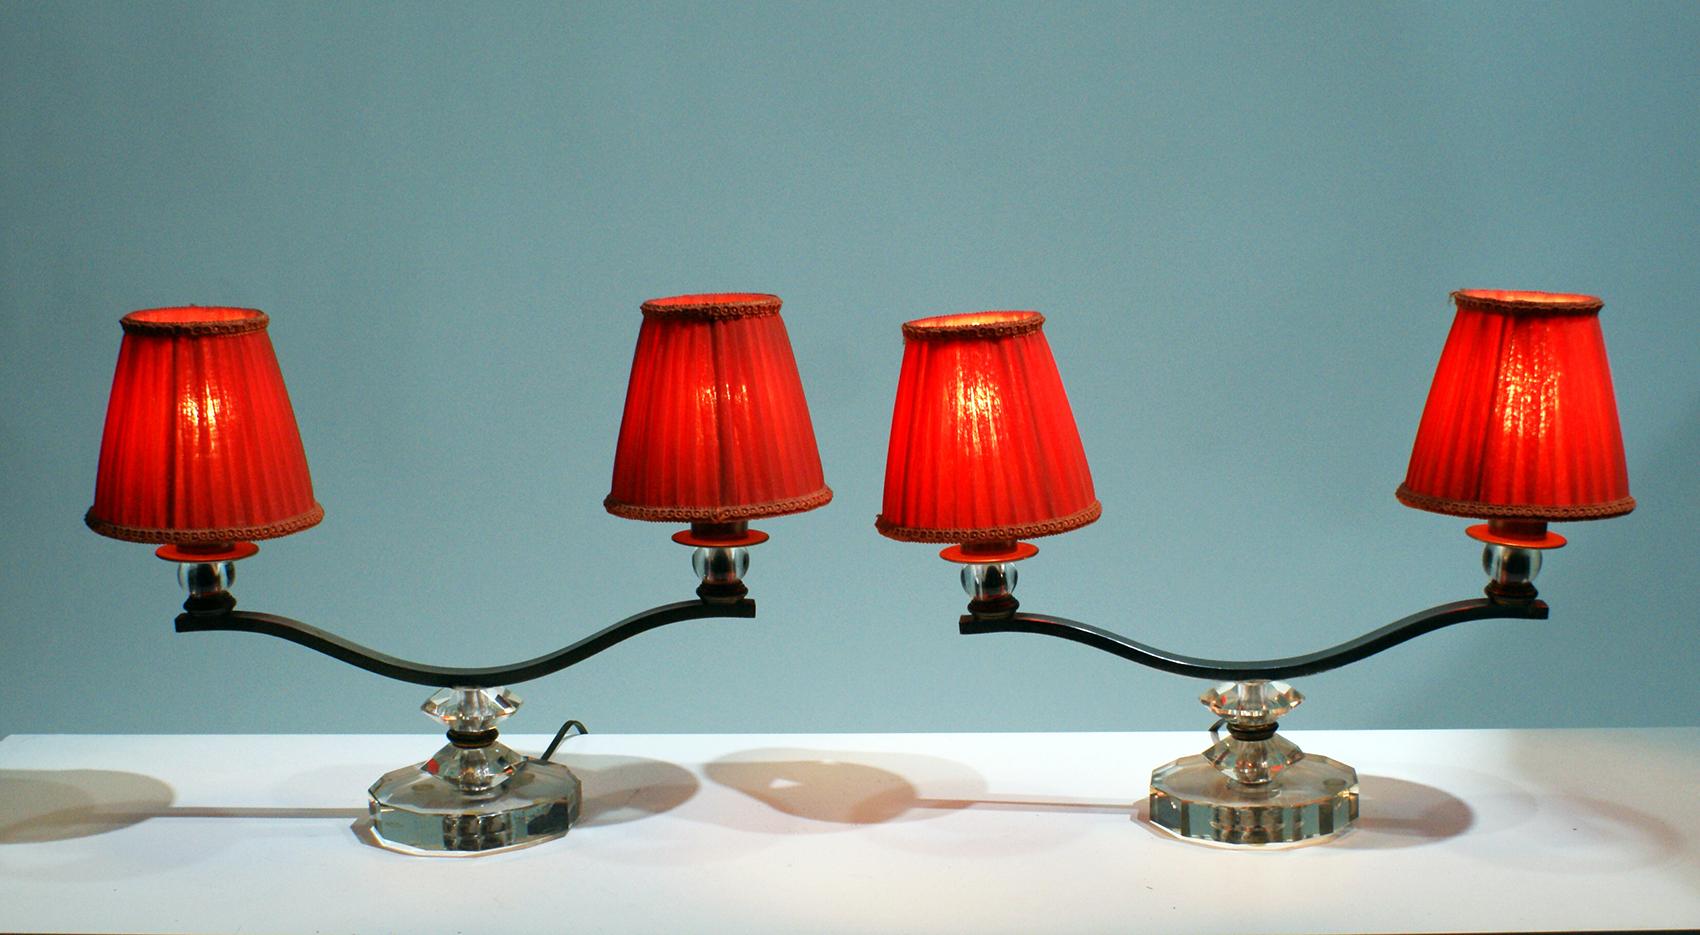 Pair of Art Deco table lamps, having two arms of lights in silver metal bronze, resting on geometric Plexiglass motif, supporting two pleated “bistro” shape lampshades in orange linen fabric.
Lovely when the lights on. Beautiful in living or dining